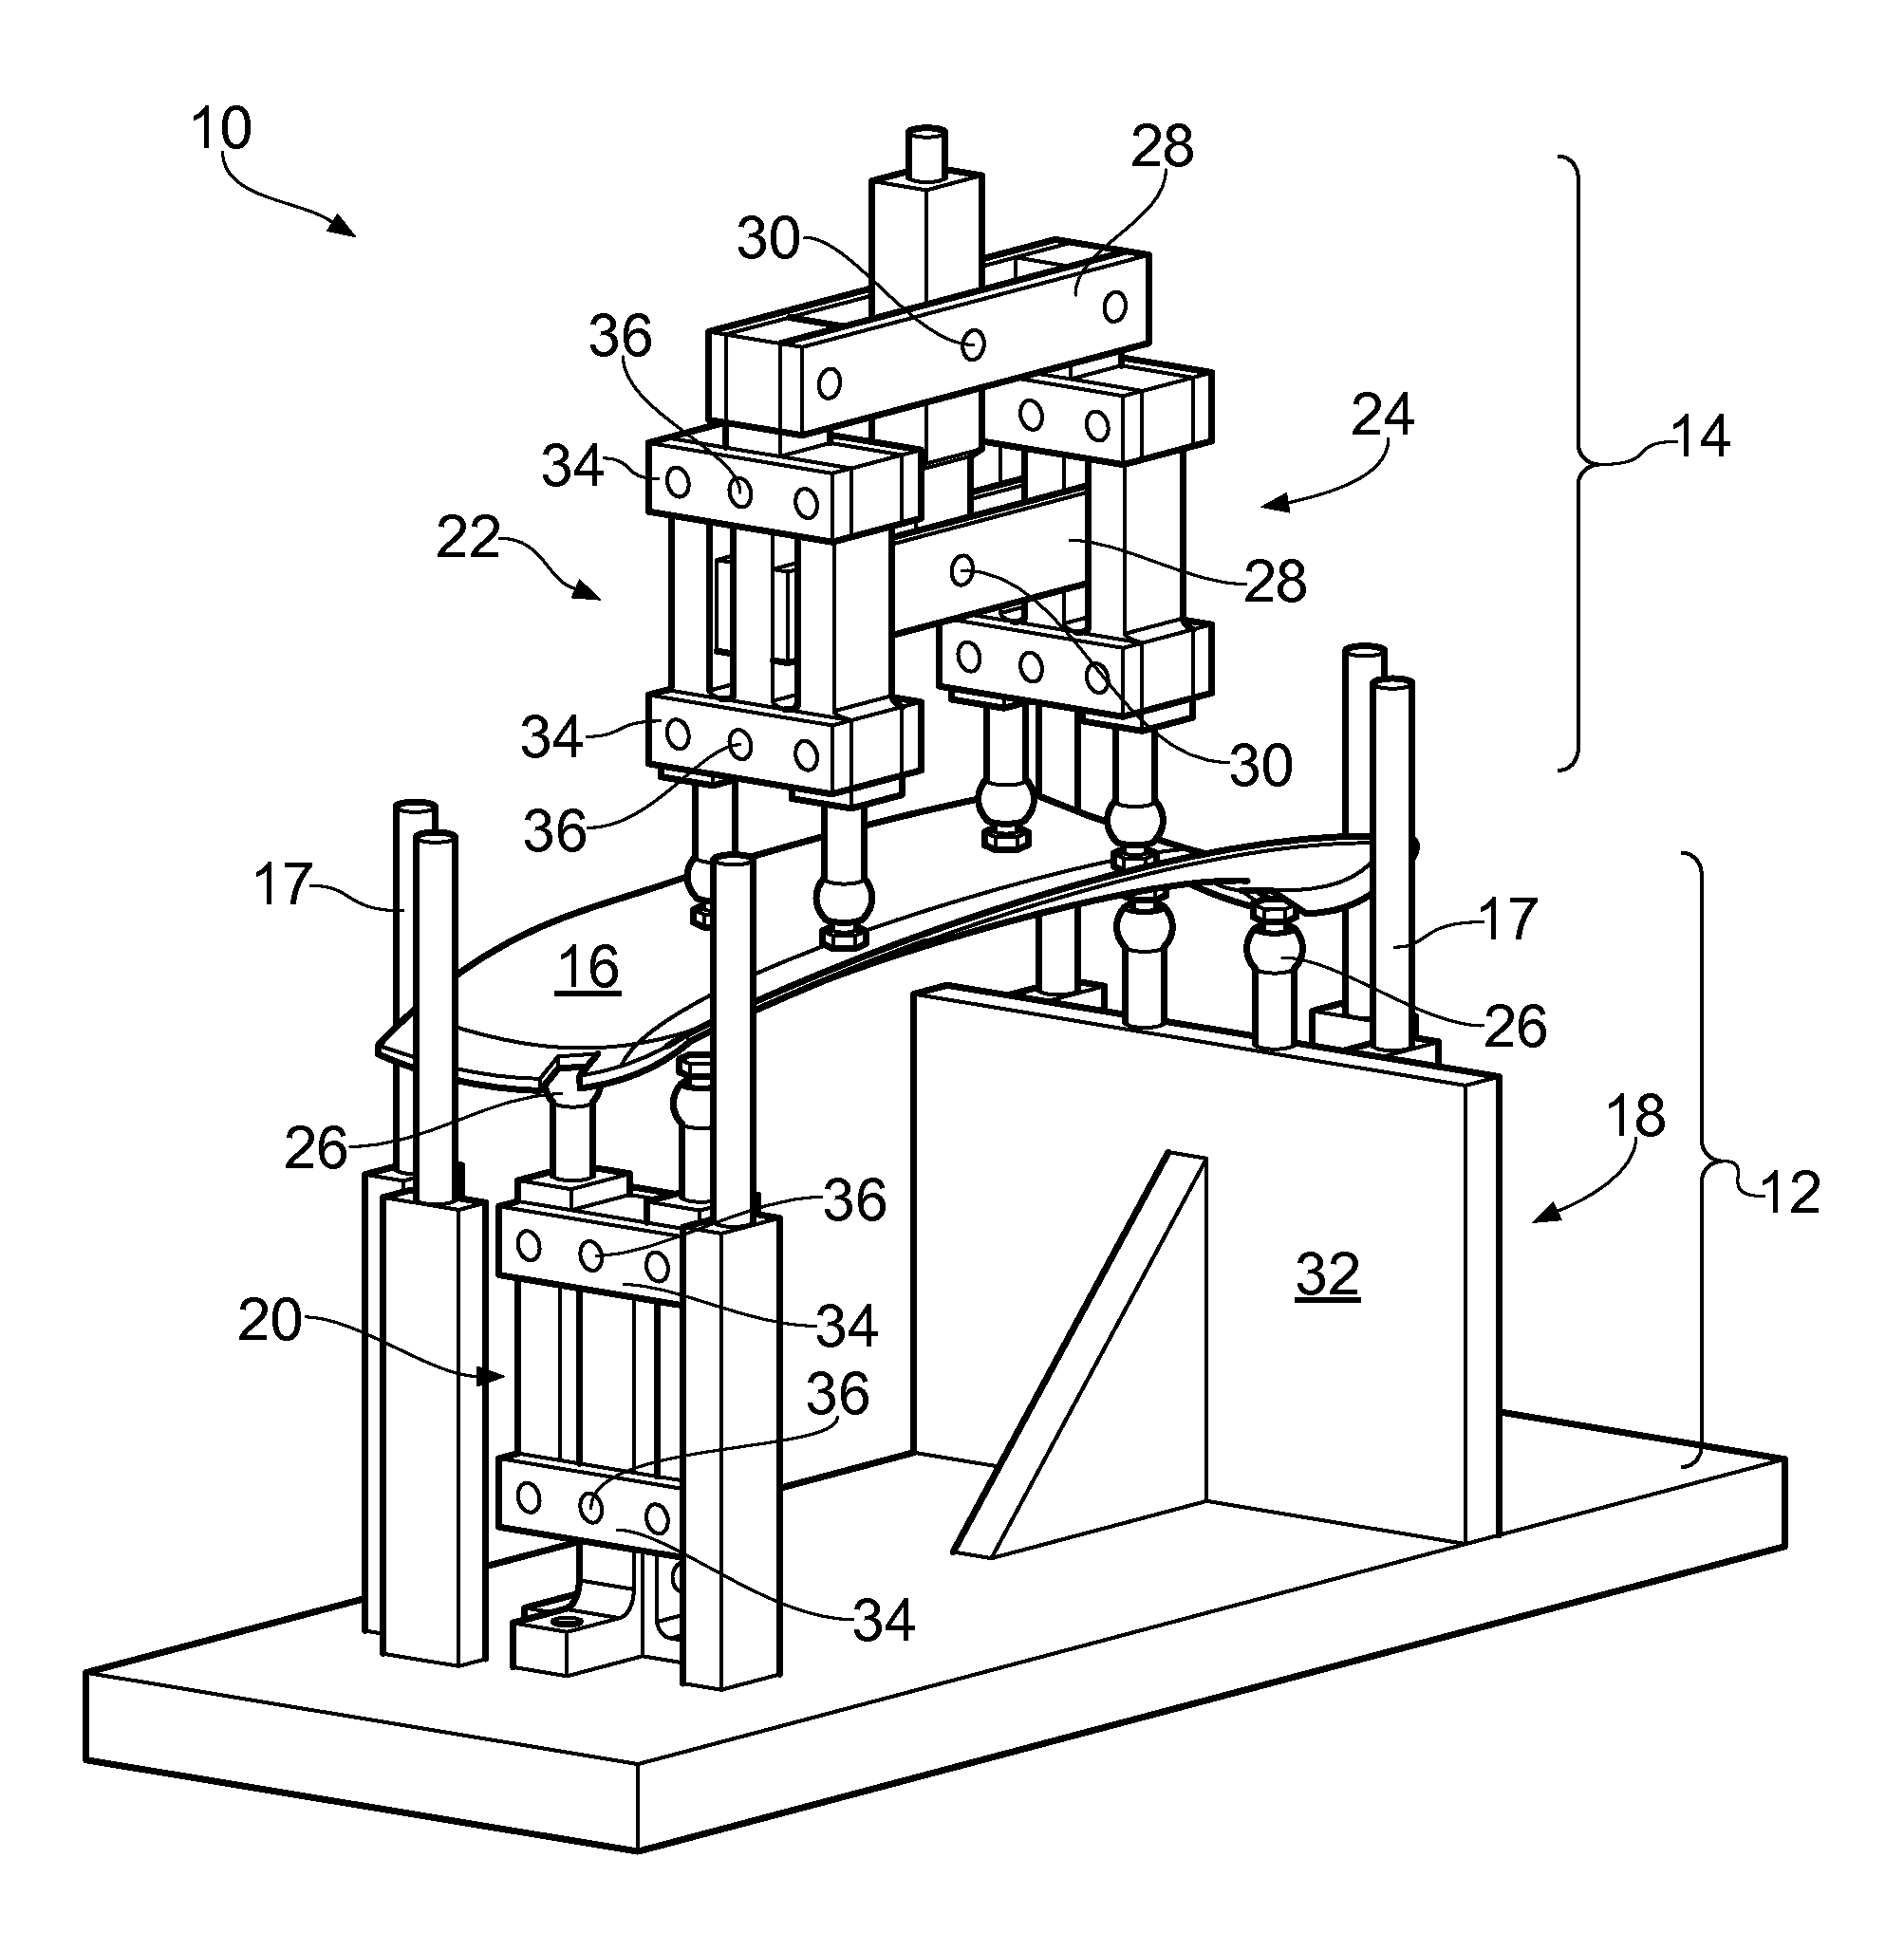 Apparatus for four-point bend testing